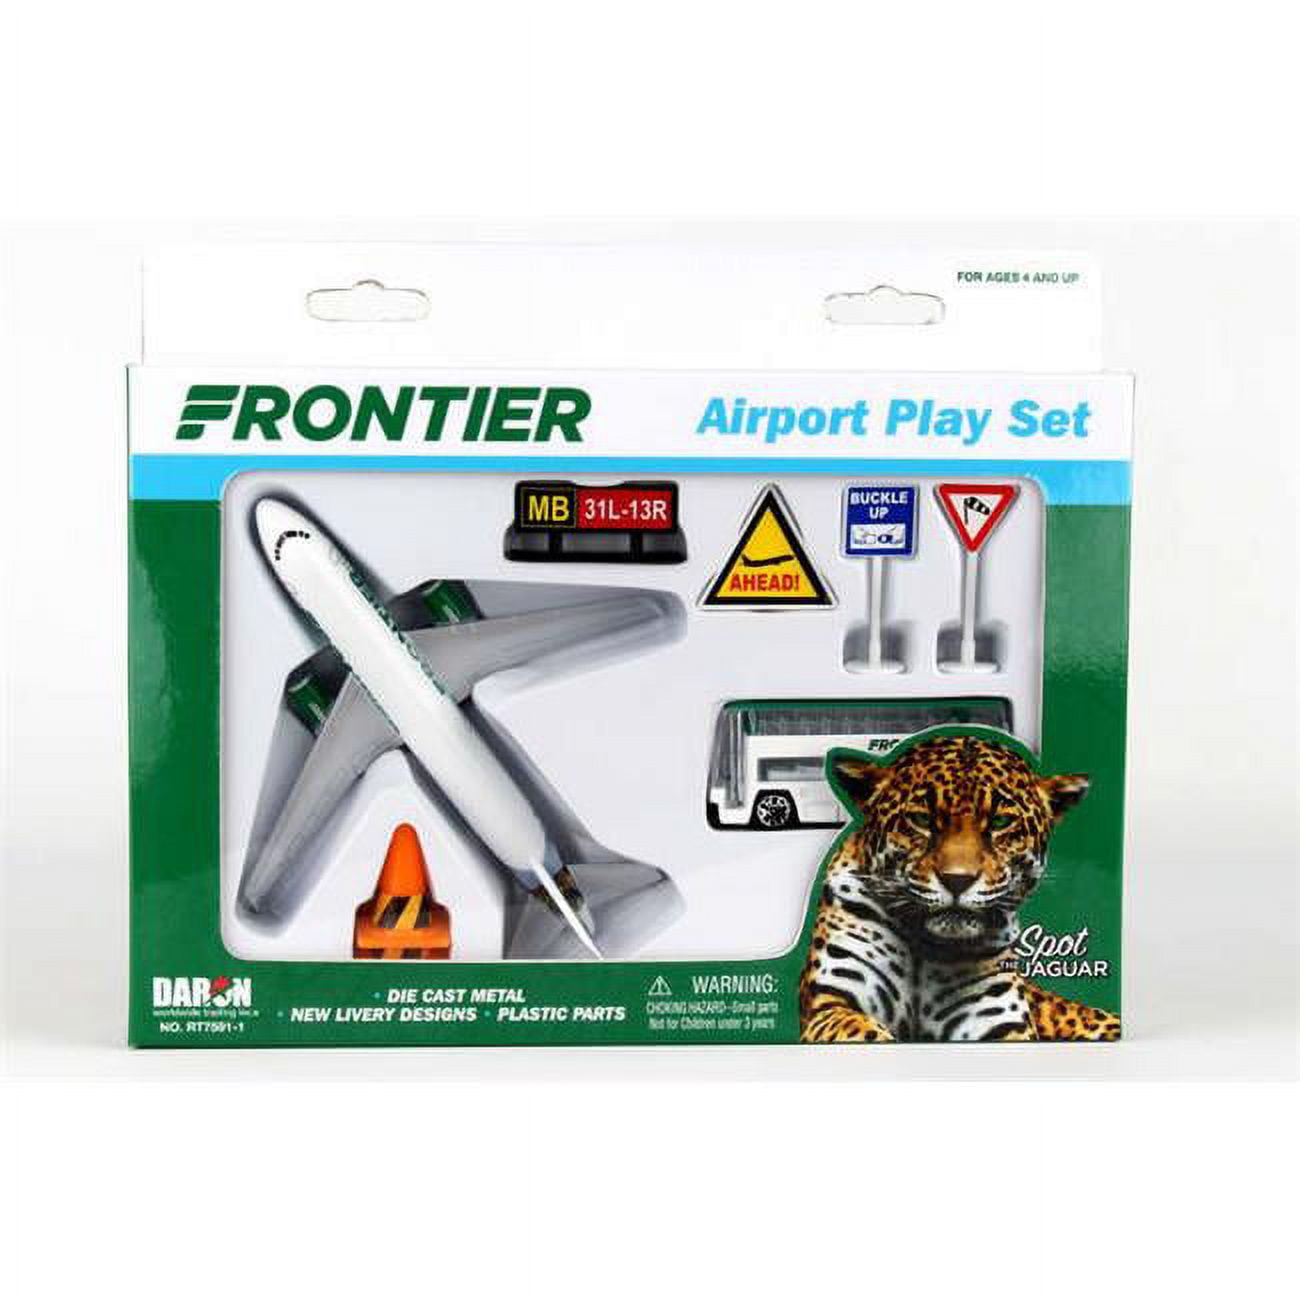 Rt7591-1 Frontier Playset New Livery